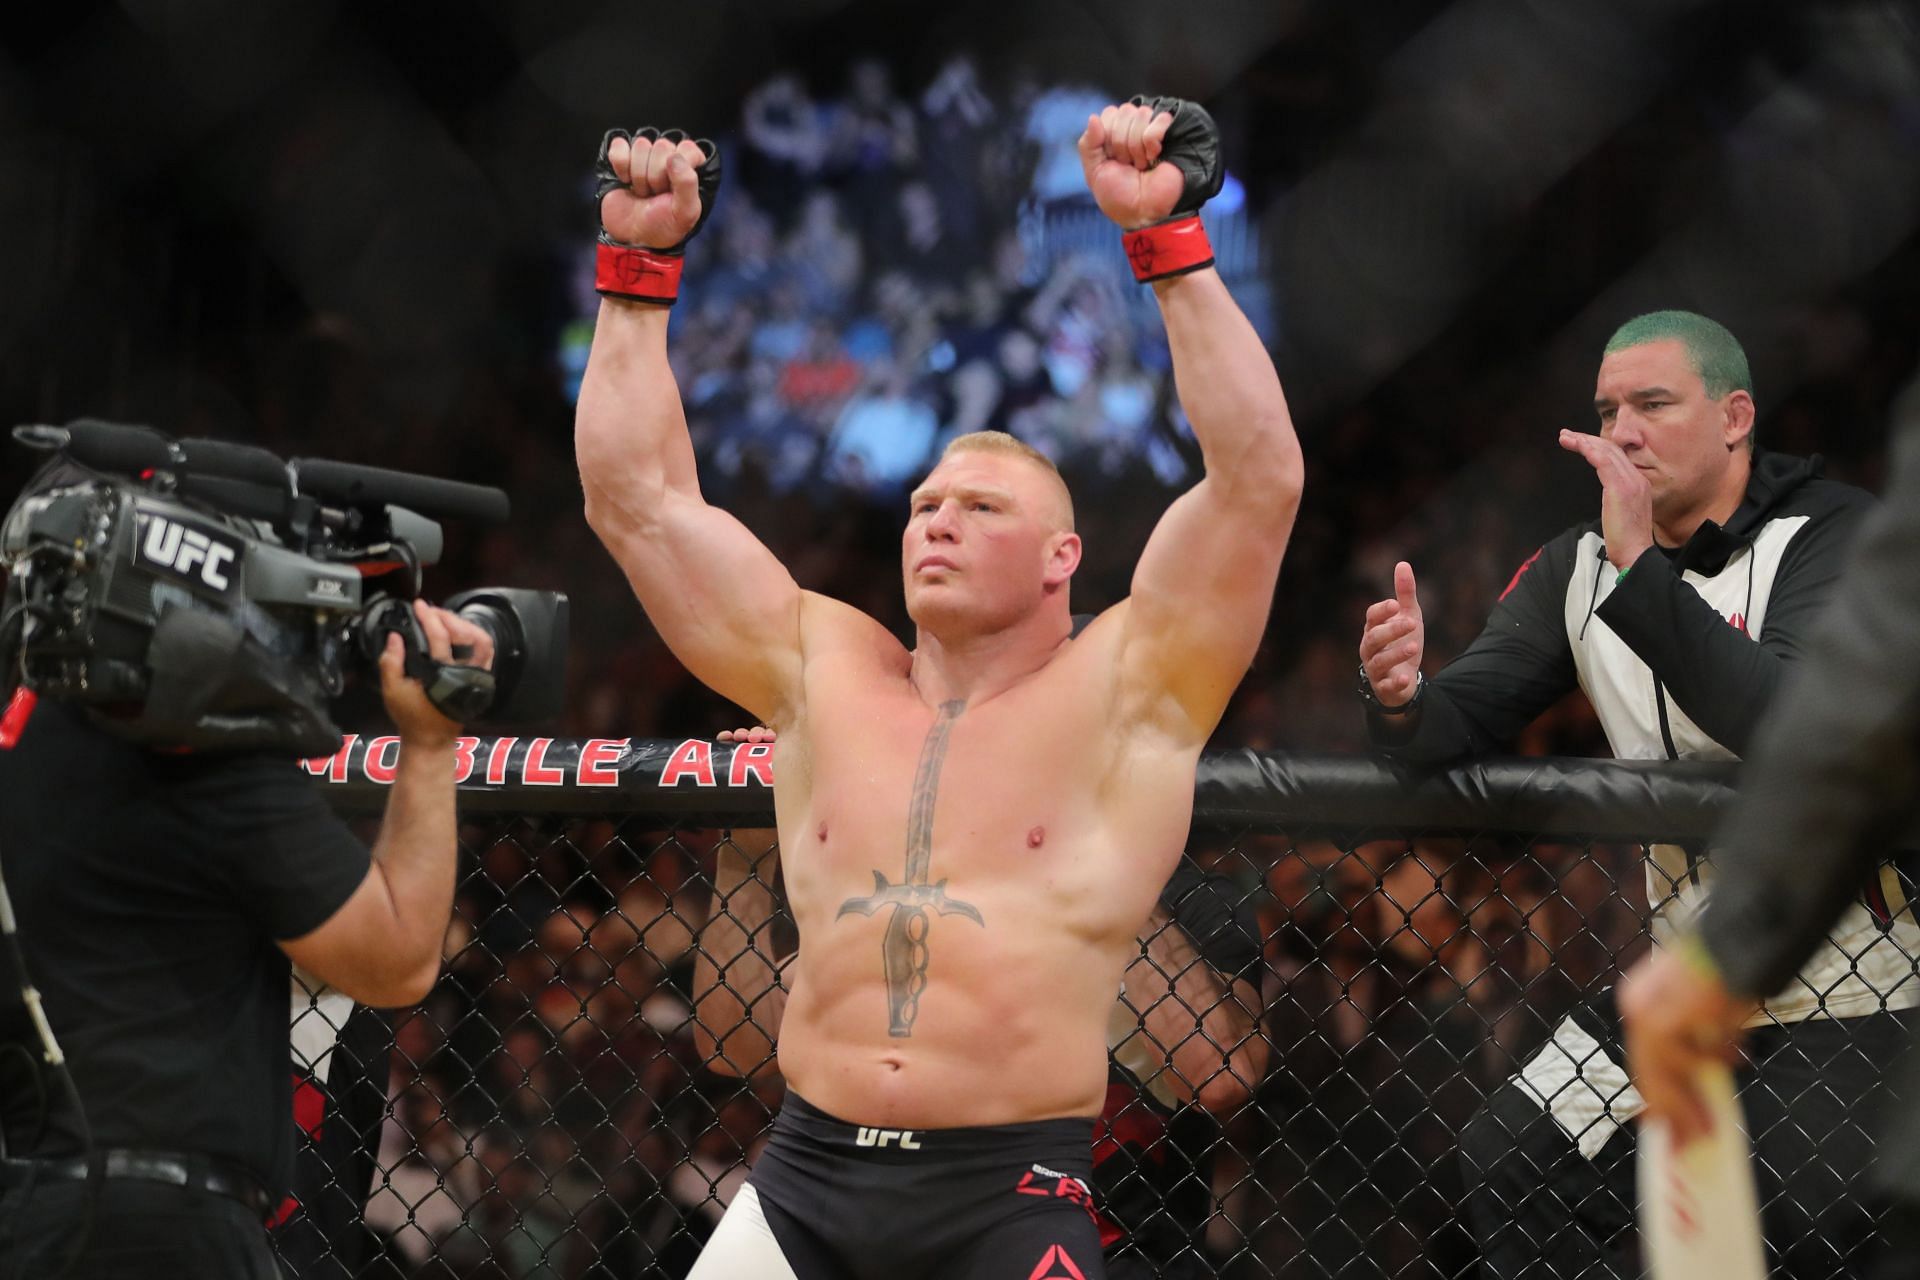 Lesnar went 4-2 in the UFC between 2005 and 2010